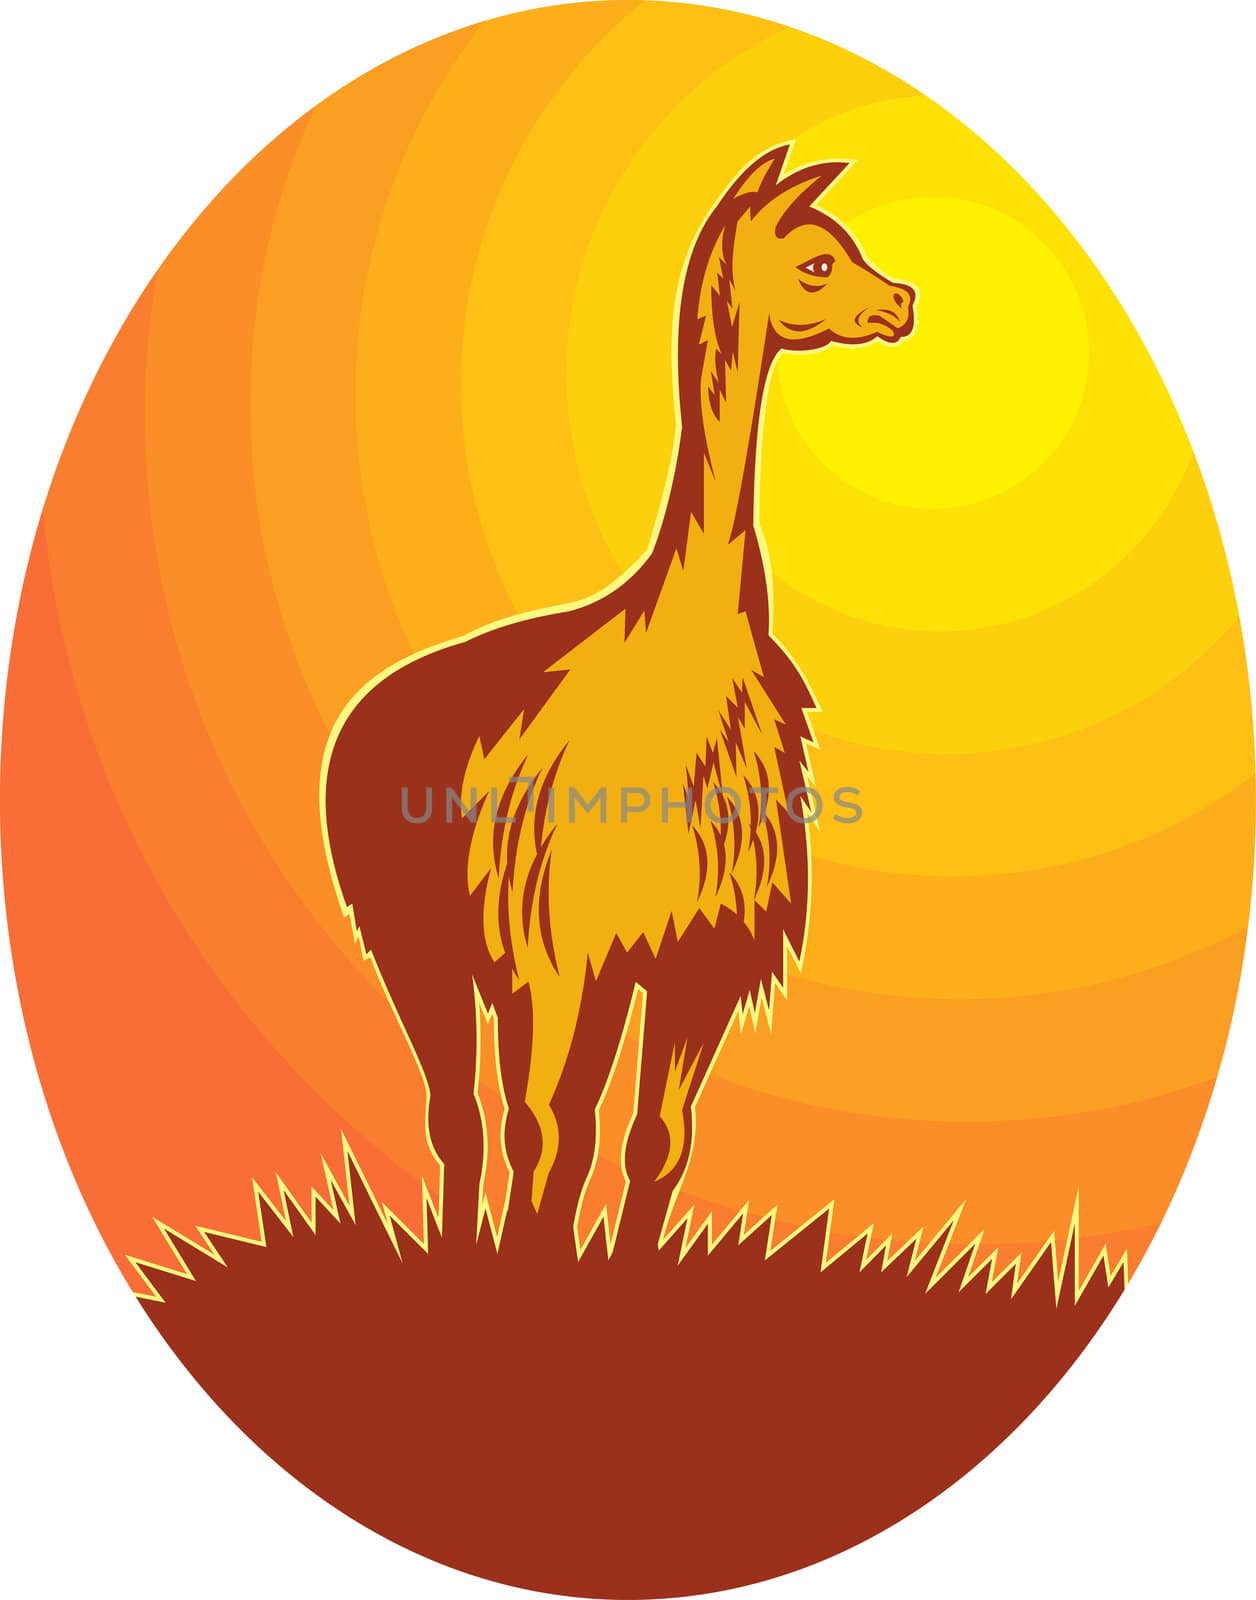 illustration of a Vicuna standing with sun in background